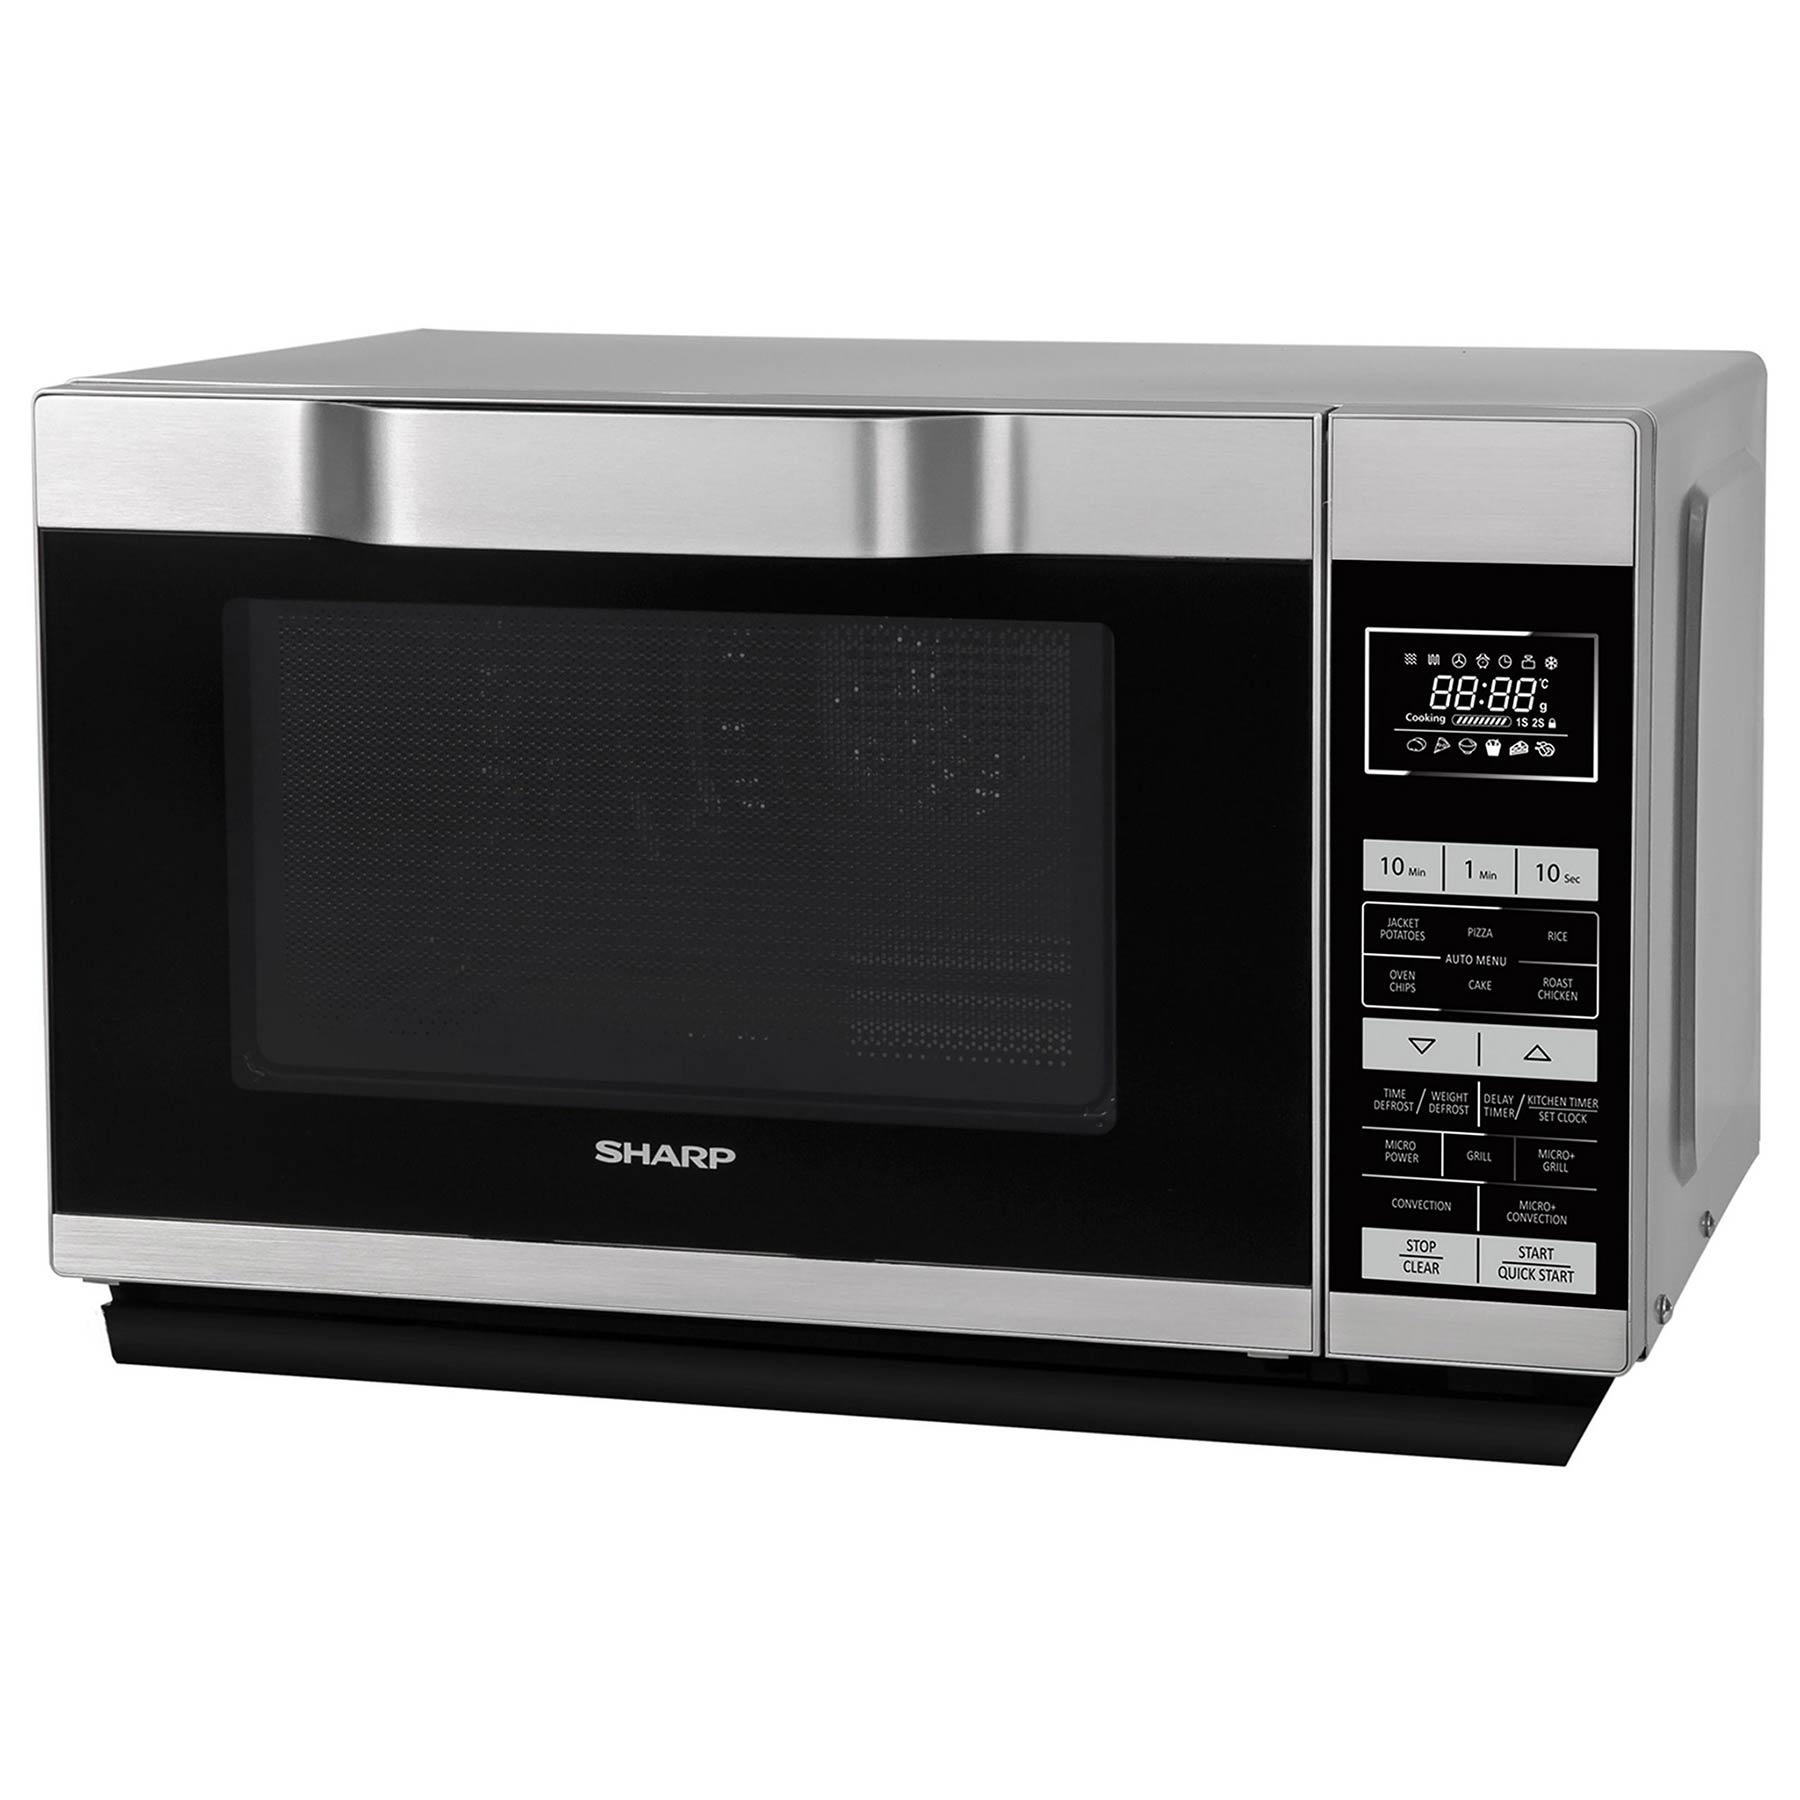 Image of Sharp R861SLM Combination Microwave Oven in Black Silver 25L 900W